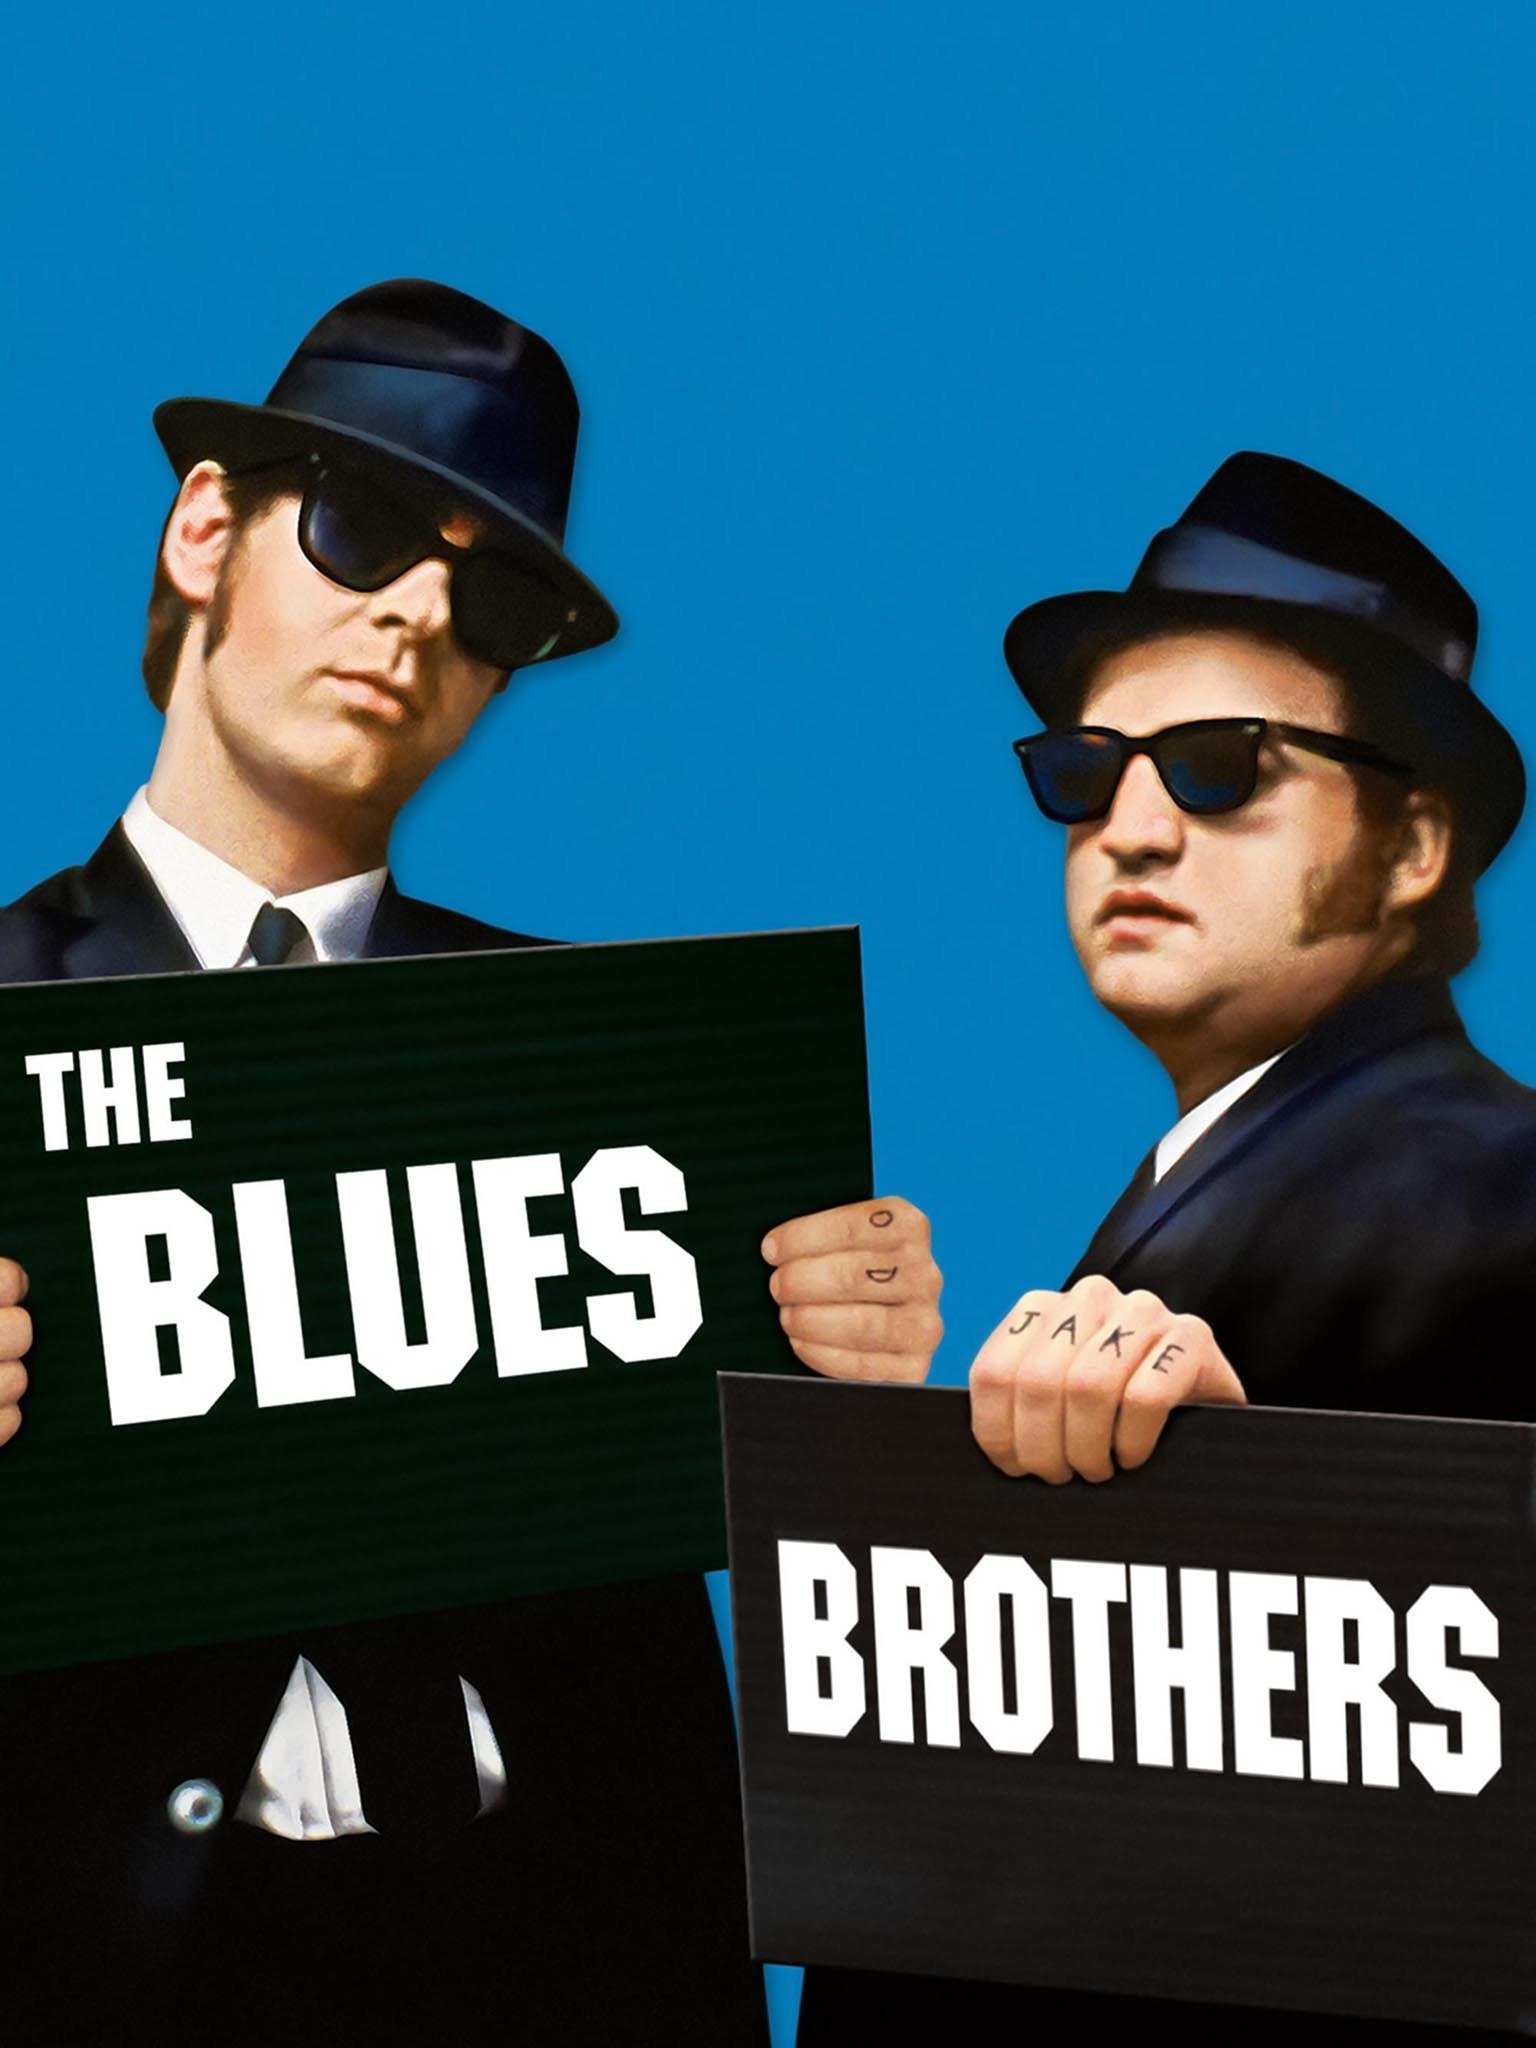 THE BLUES BROTHERS  Siskel Film Center